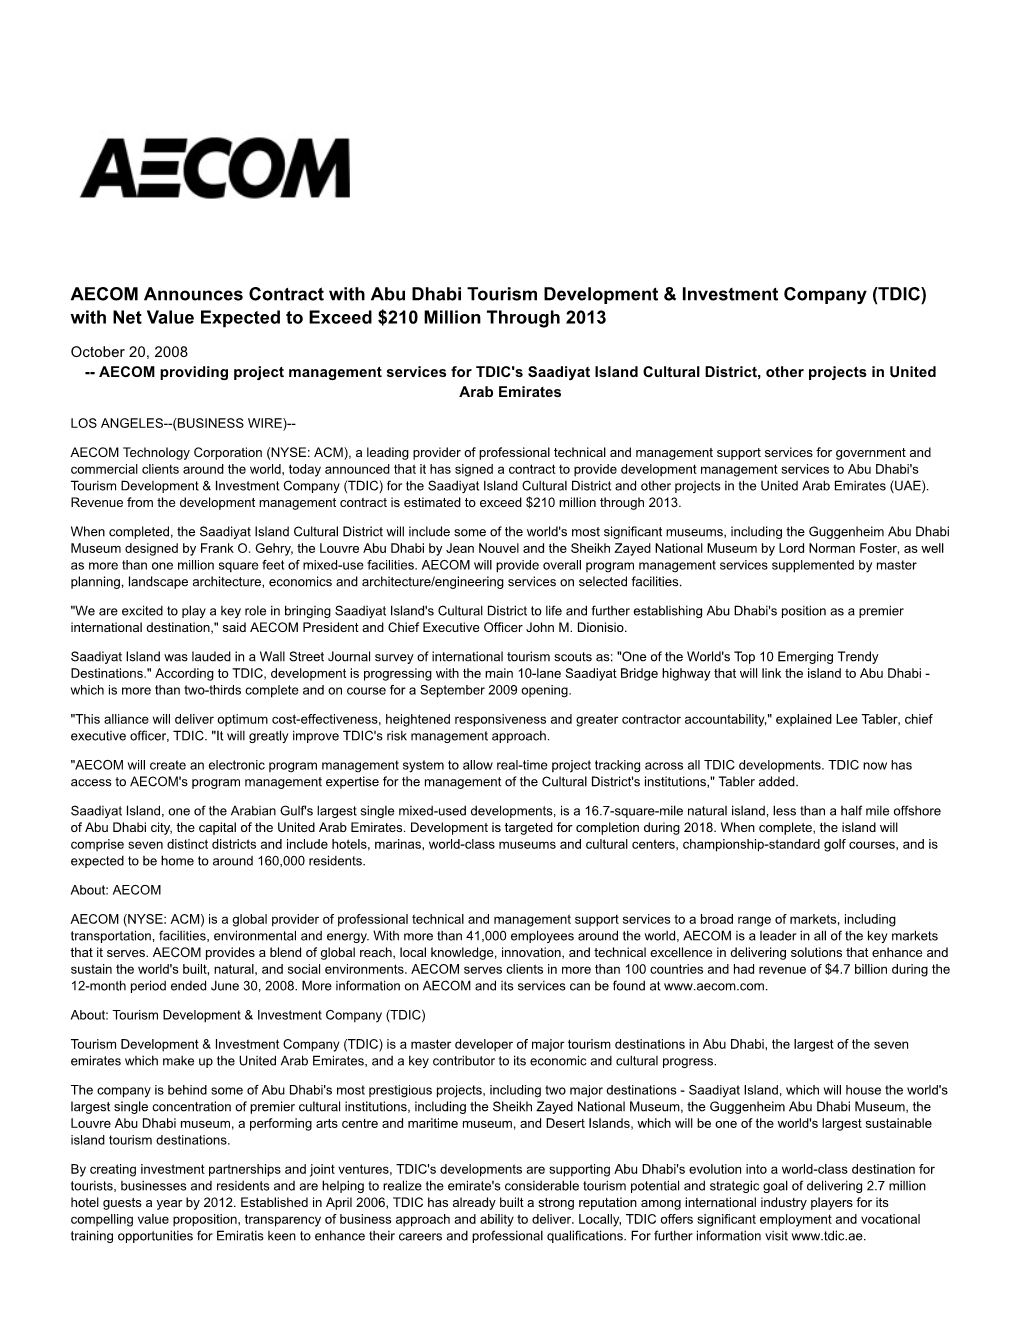 AECOM Announces Contract with Abu Dhabi Tourism Development & Investment Company (TDIC) with Net Value Expected to Exceed $210 Million Through 2013